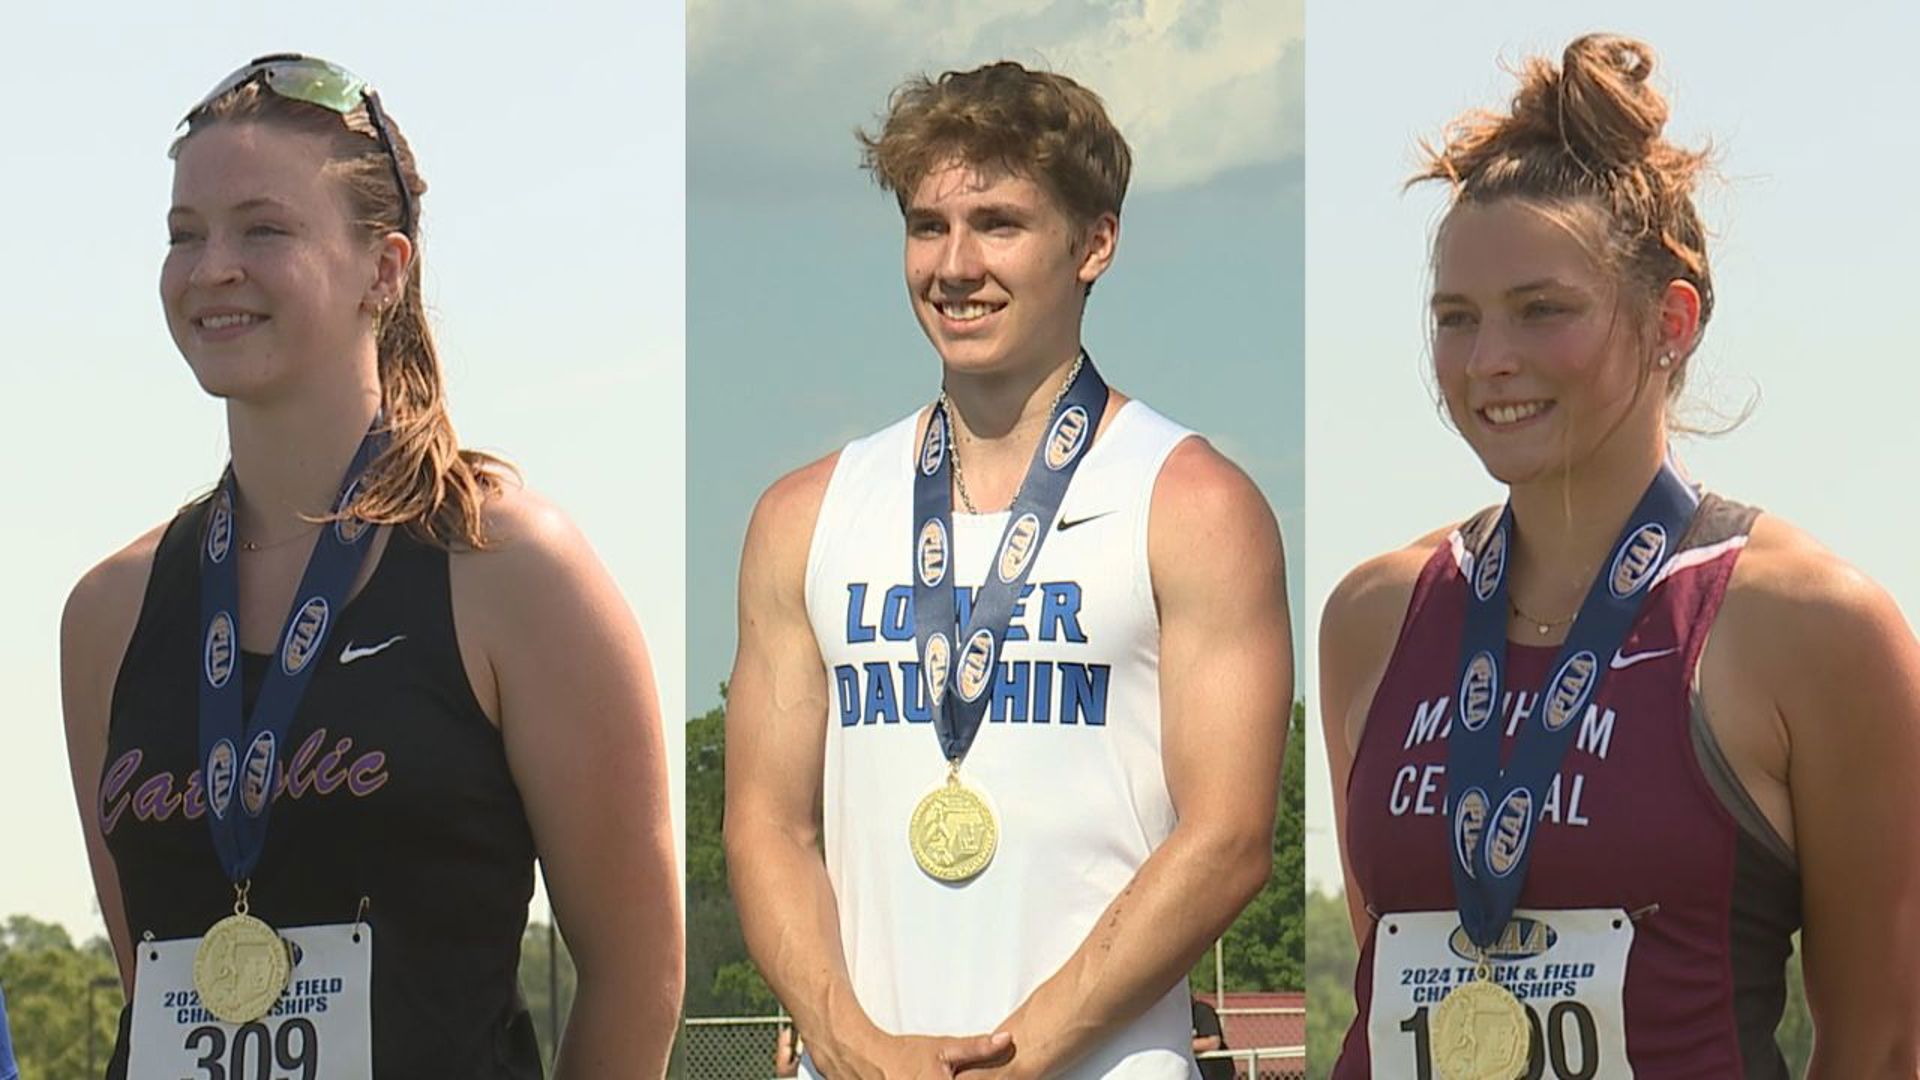 District III athletes win state gold in the discus, pole vault, and shot put on Friday.